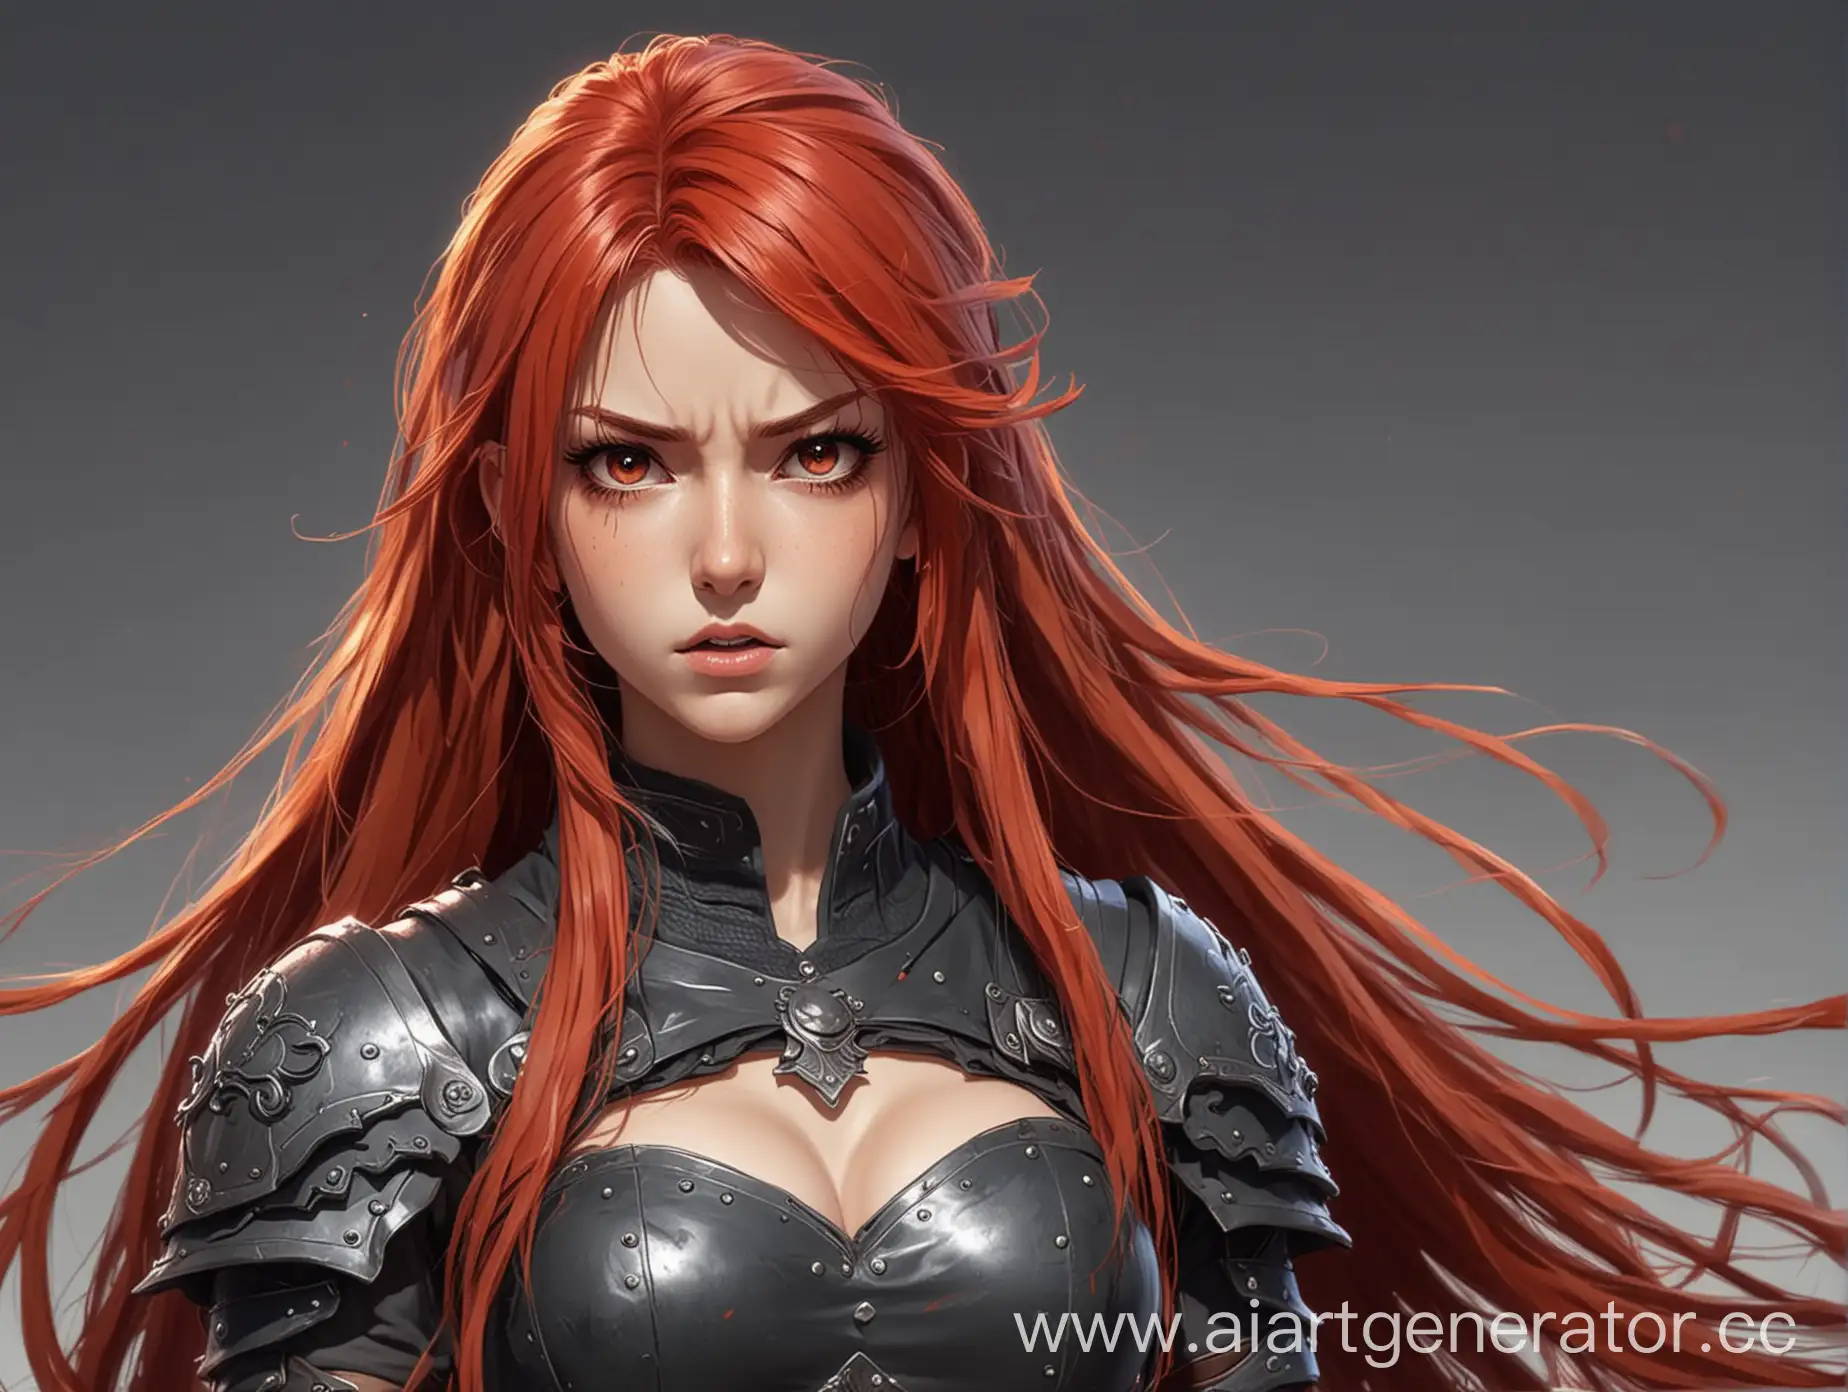 Warrior girl with menacing expression with red long hair in anime 2d style 